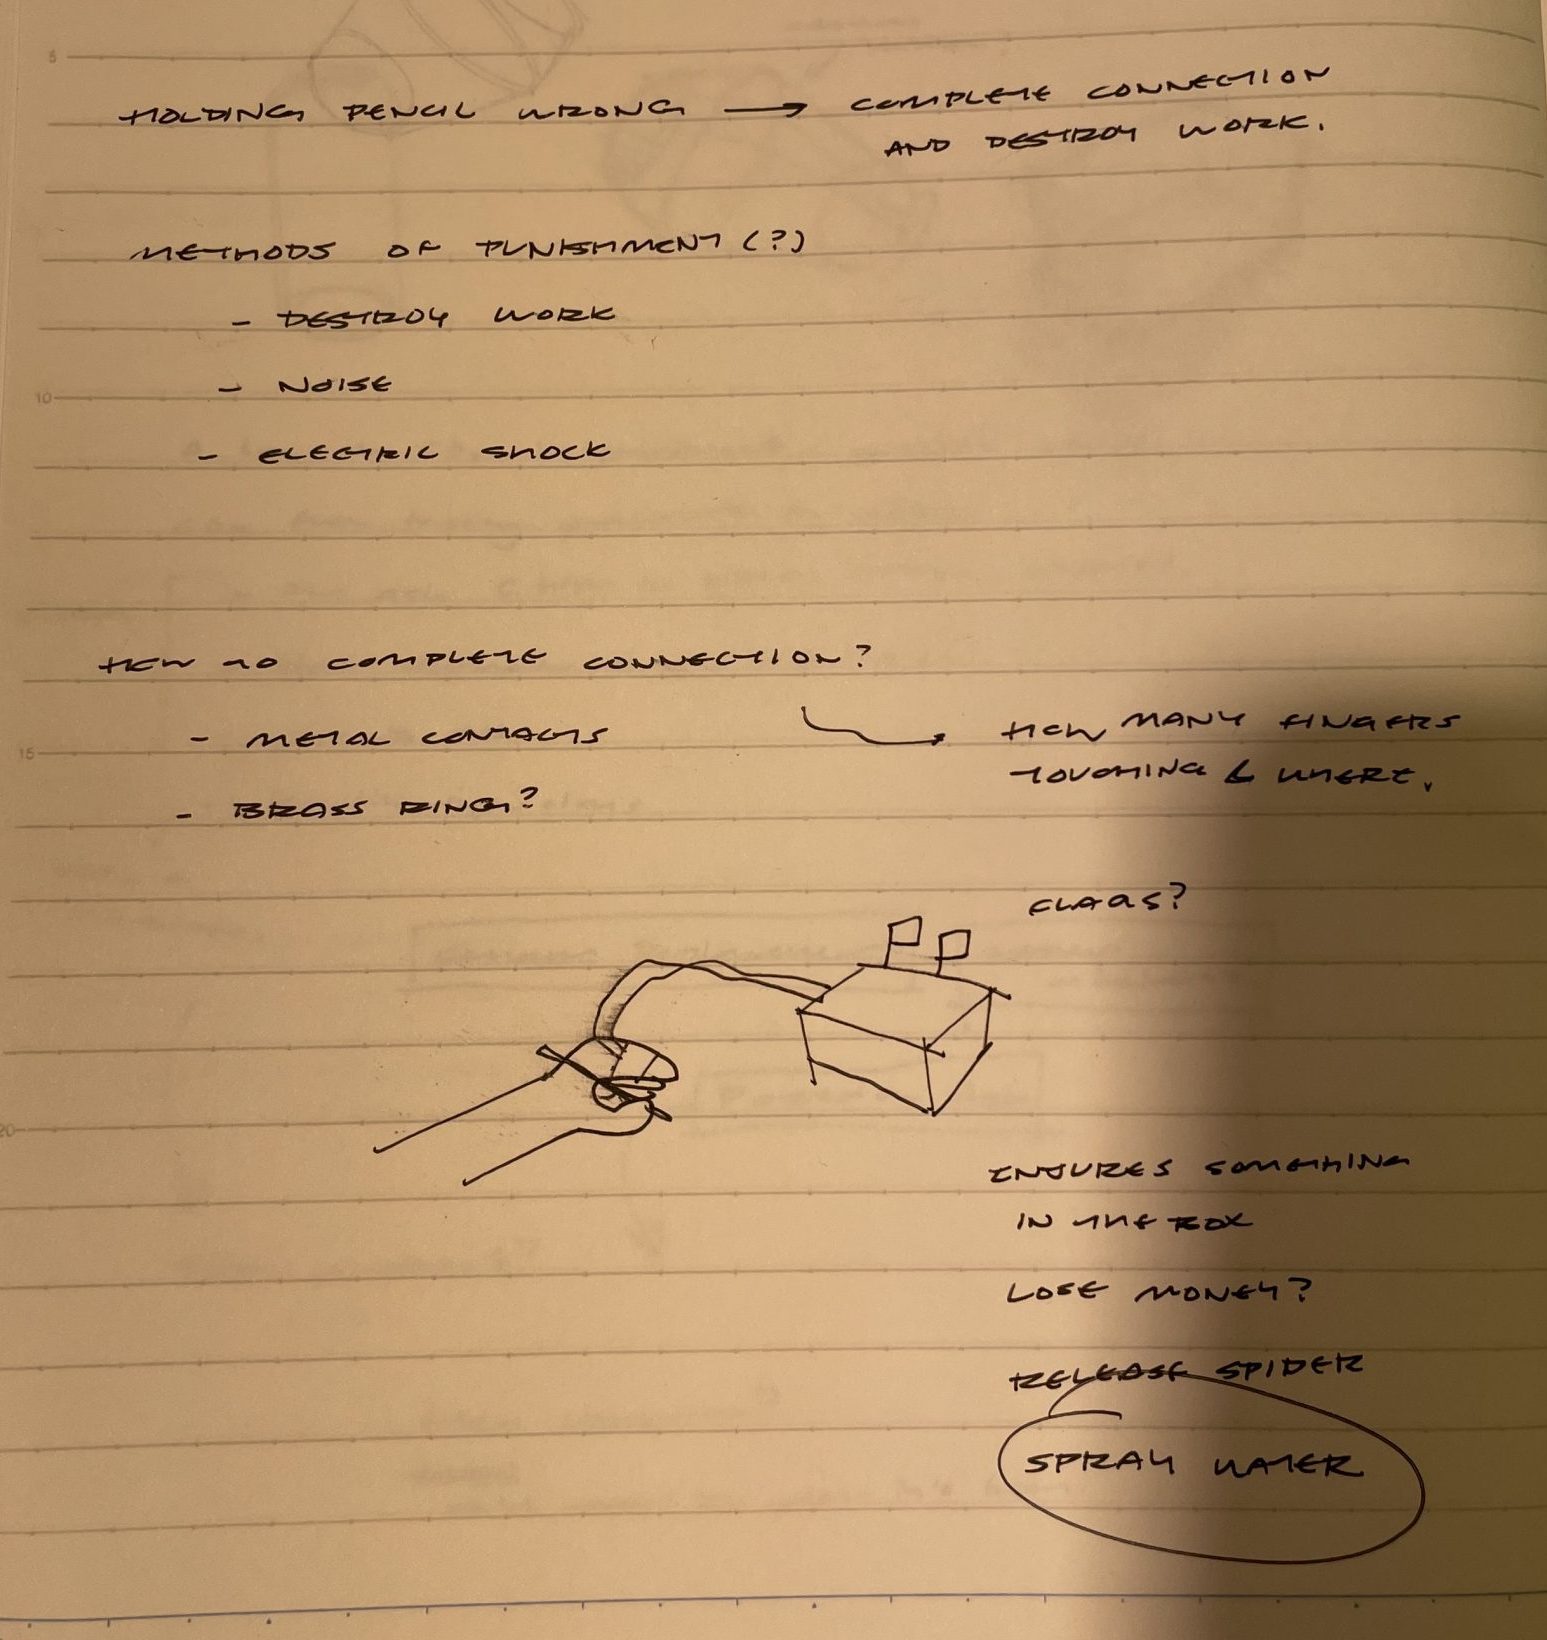 notebook page with notes from the first critique. There is a crude sketch of the box in front of a hand attached to it with wires